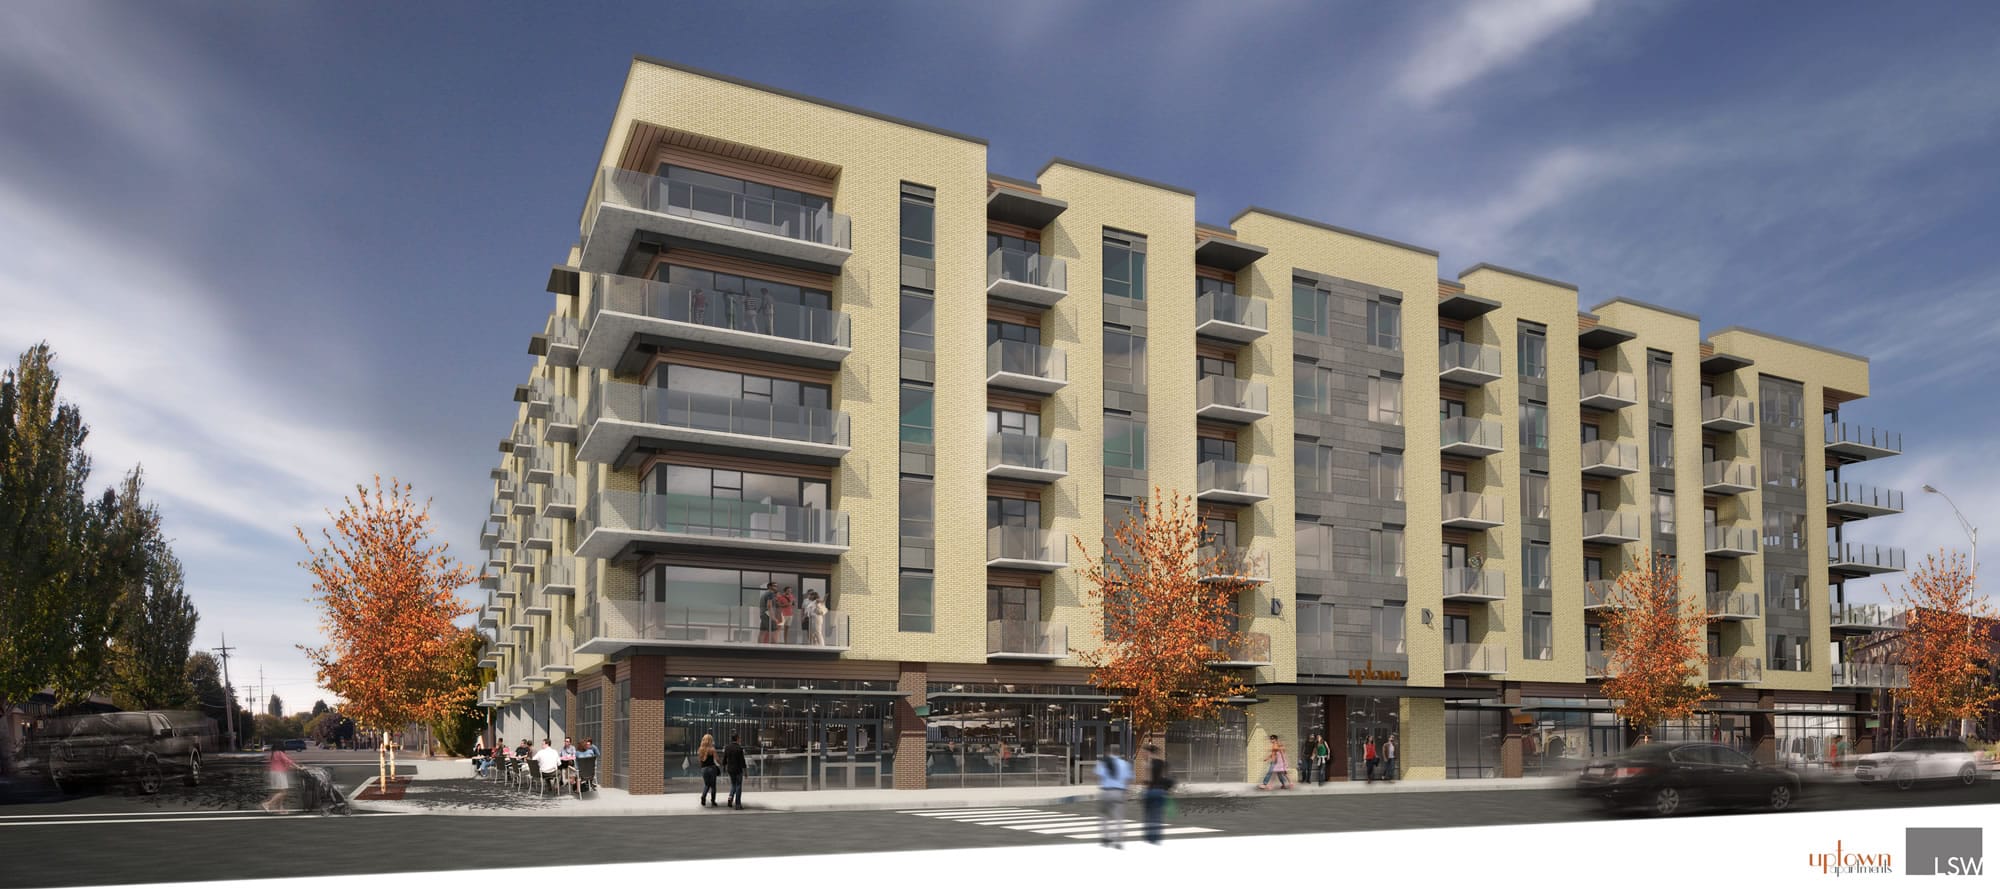 The Uptown is a 166-unit apartment complex planned by developer David Copenhaver for a full city block in Uptown Village.